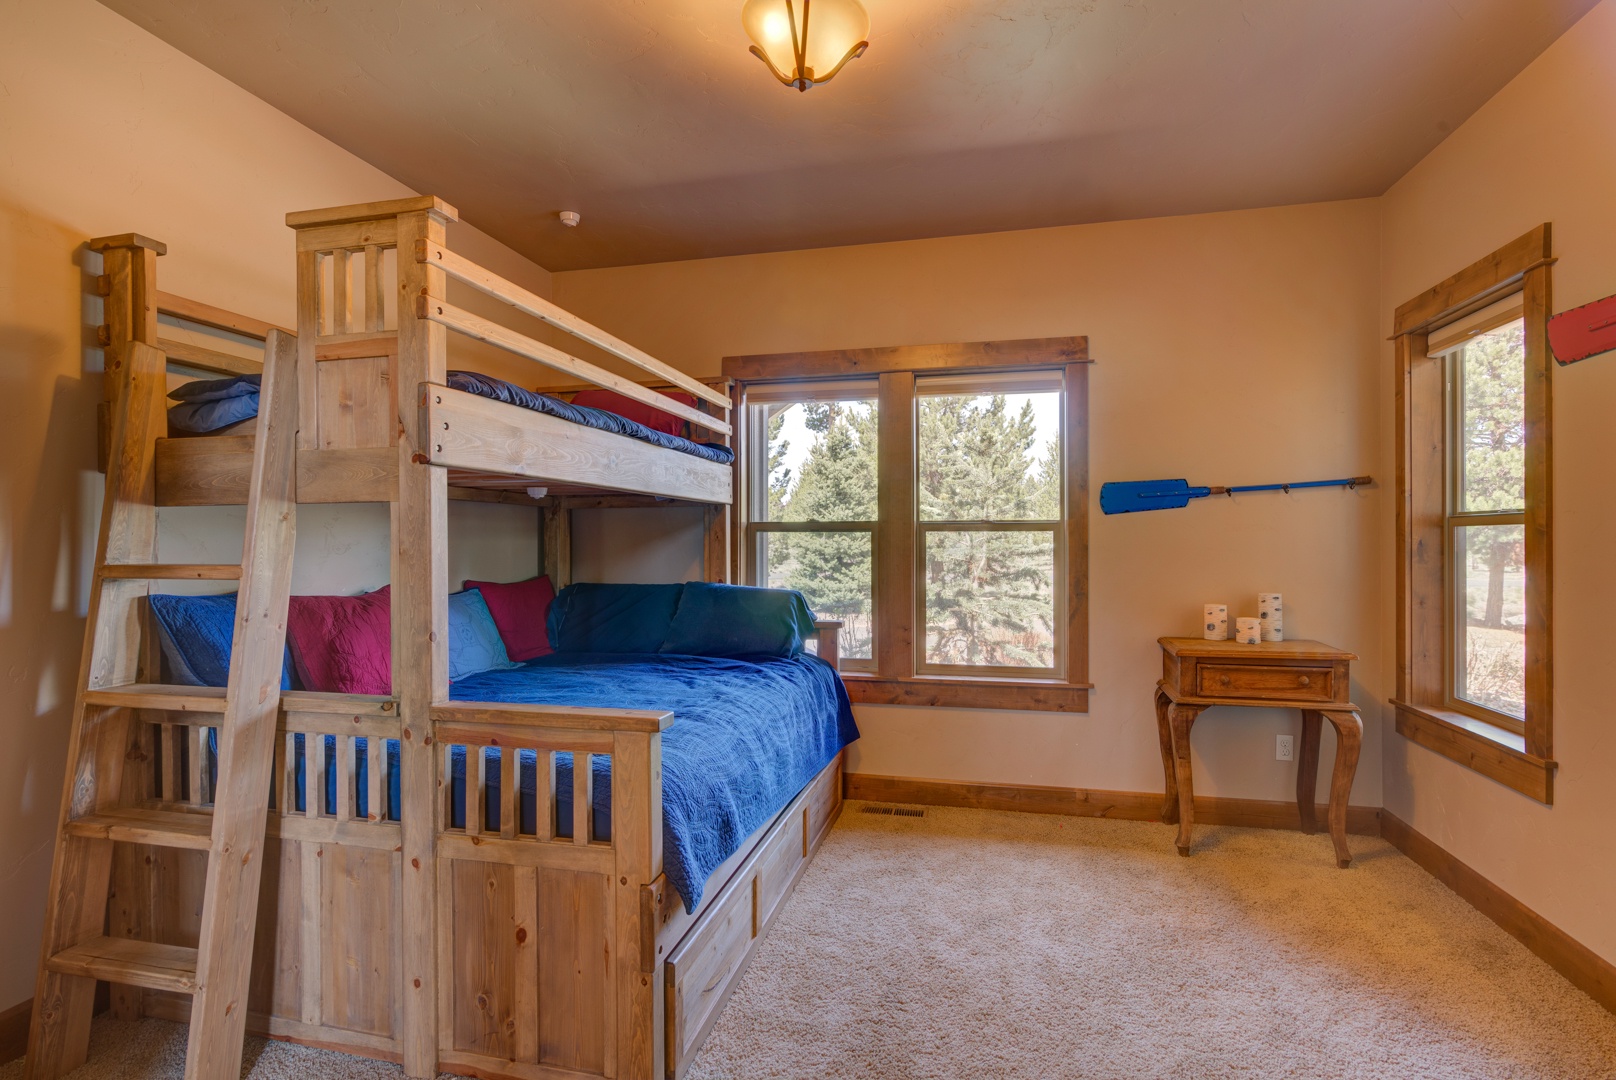 Guest bedroom with pyramid bunk beds and trundle.